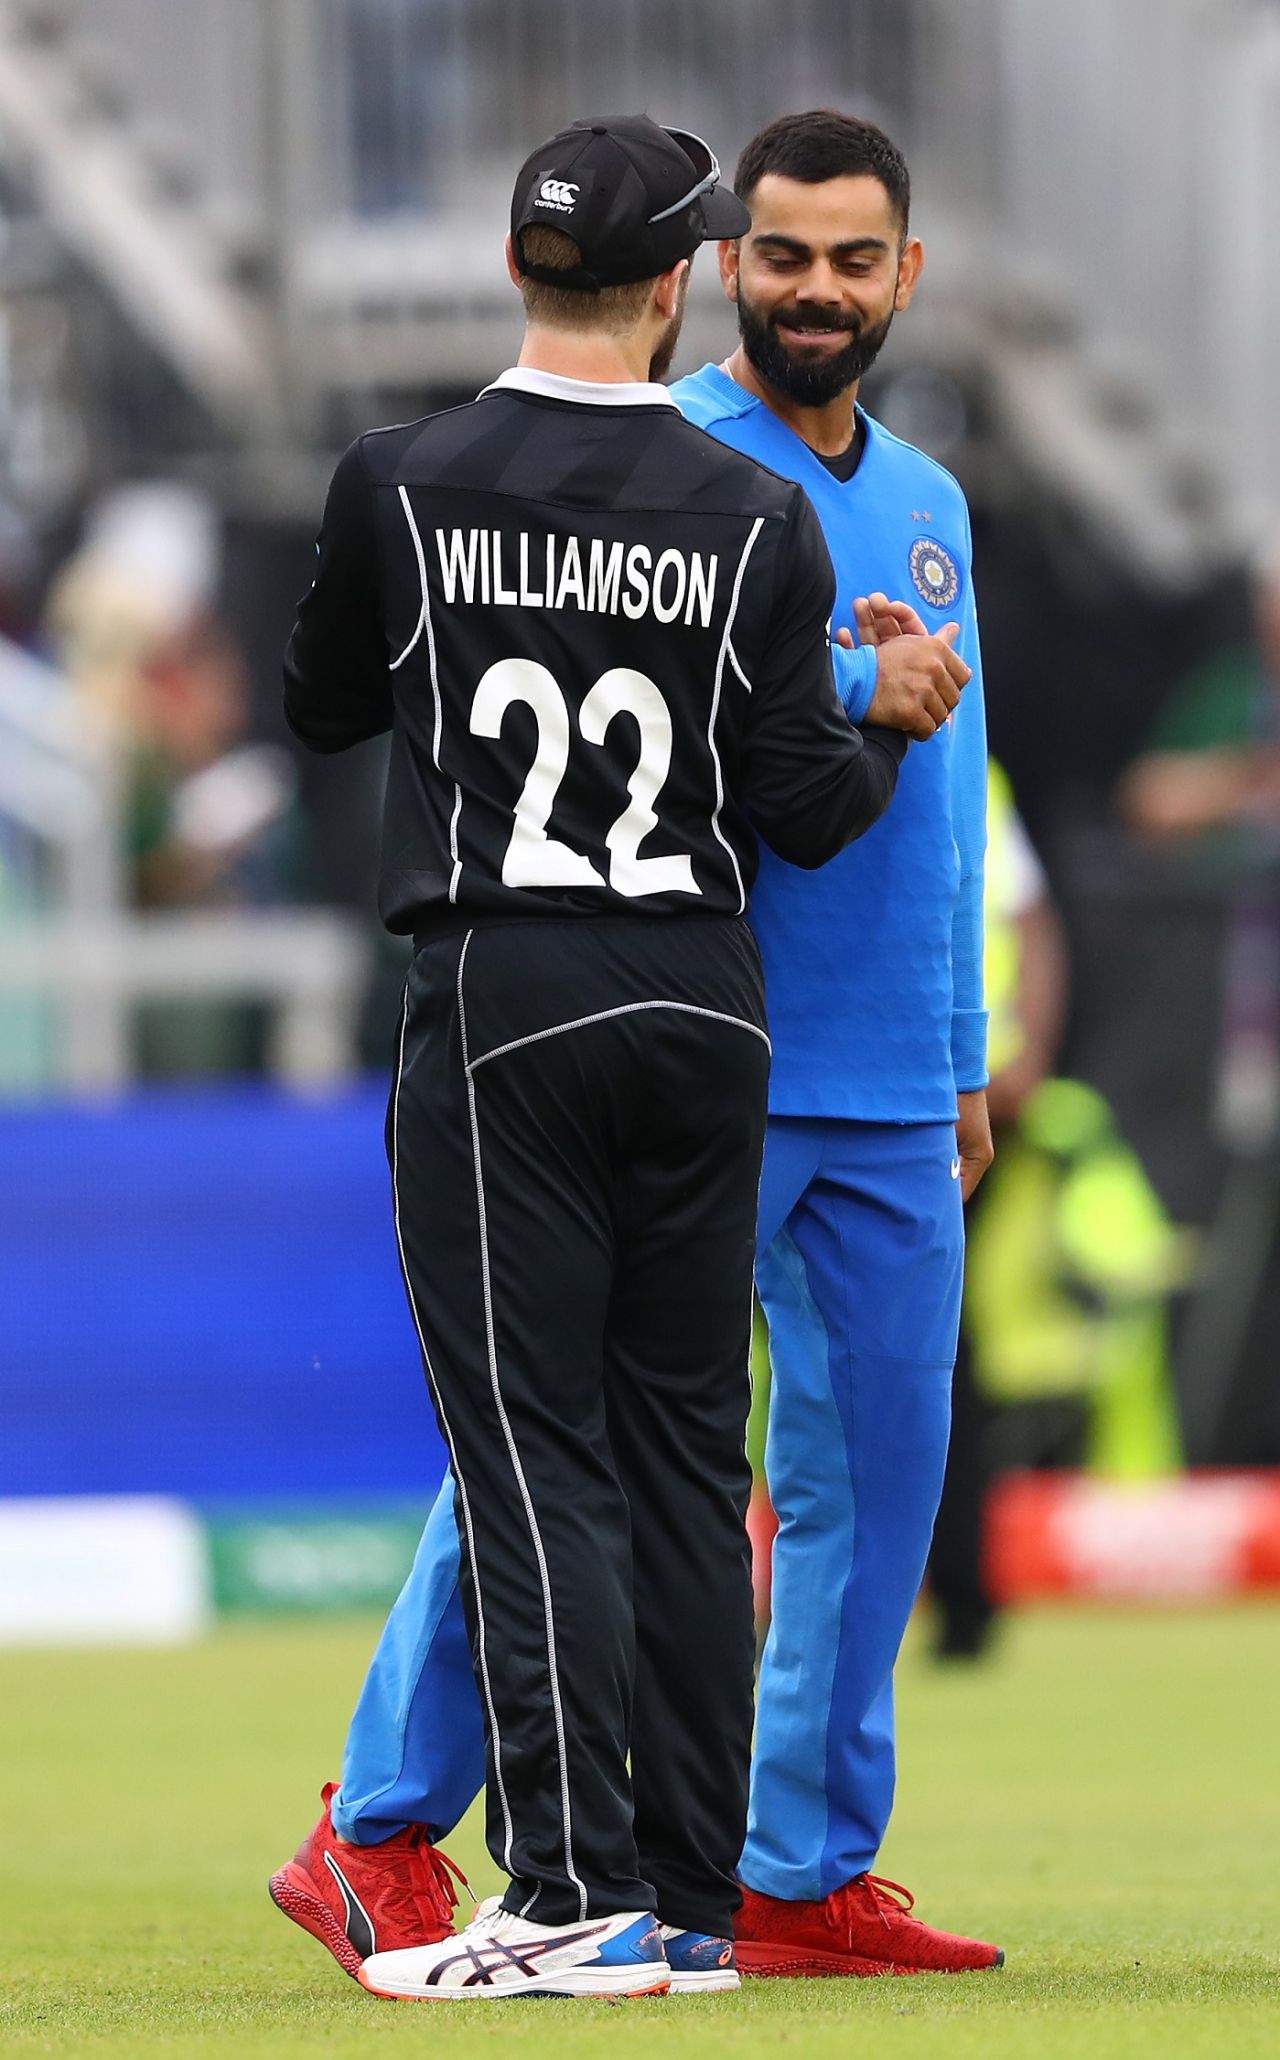 Kane Williamson and Virat Kohli greet each other after the game, India v New Zealand, World Cup 2019 semi-final, Old Trafford, July 10 2019